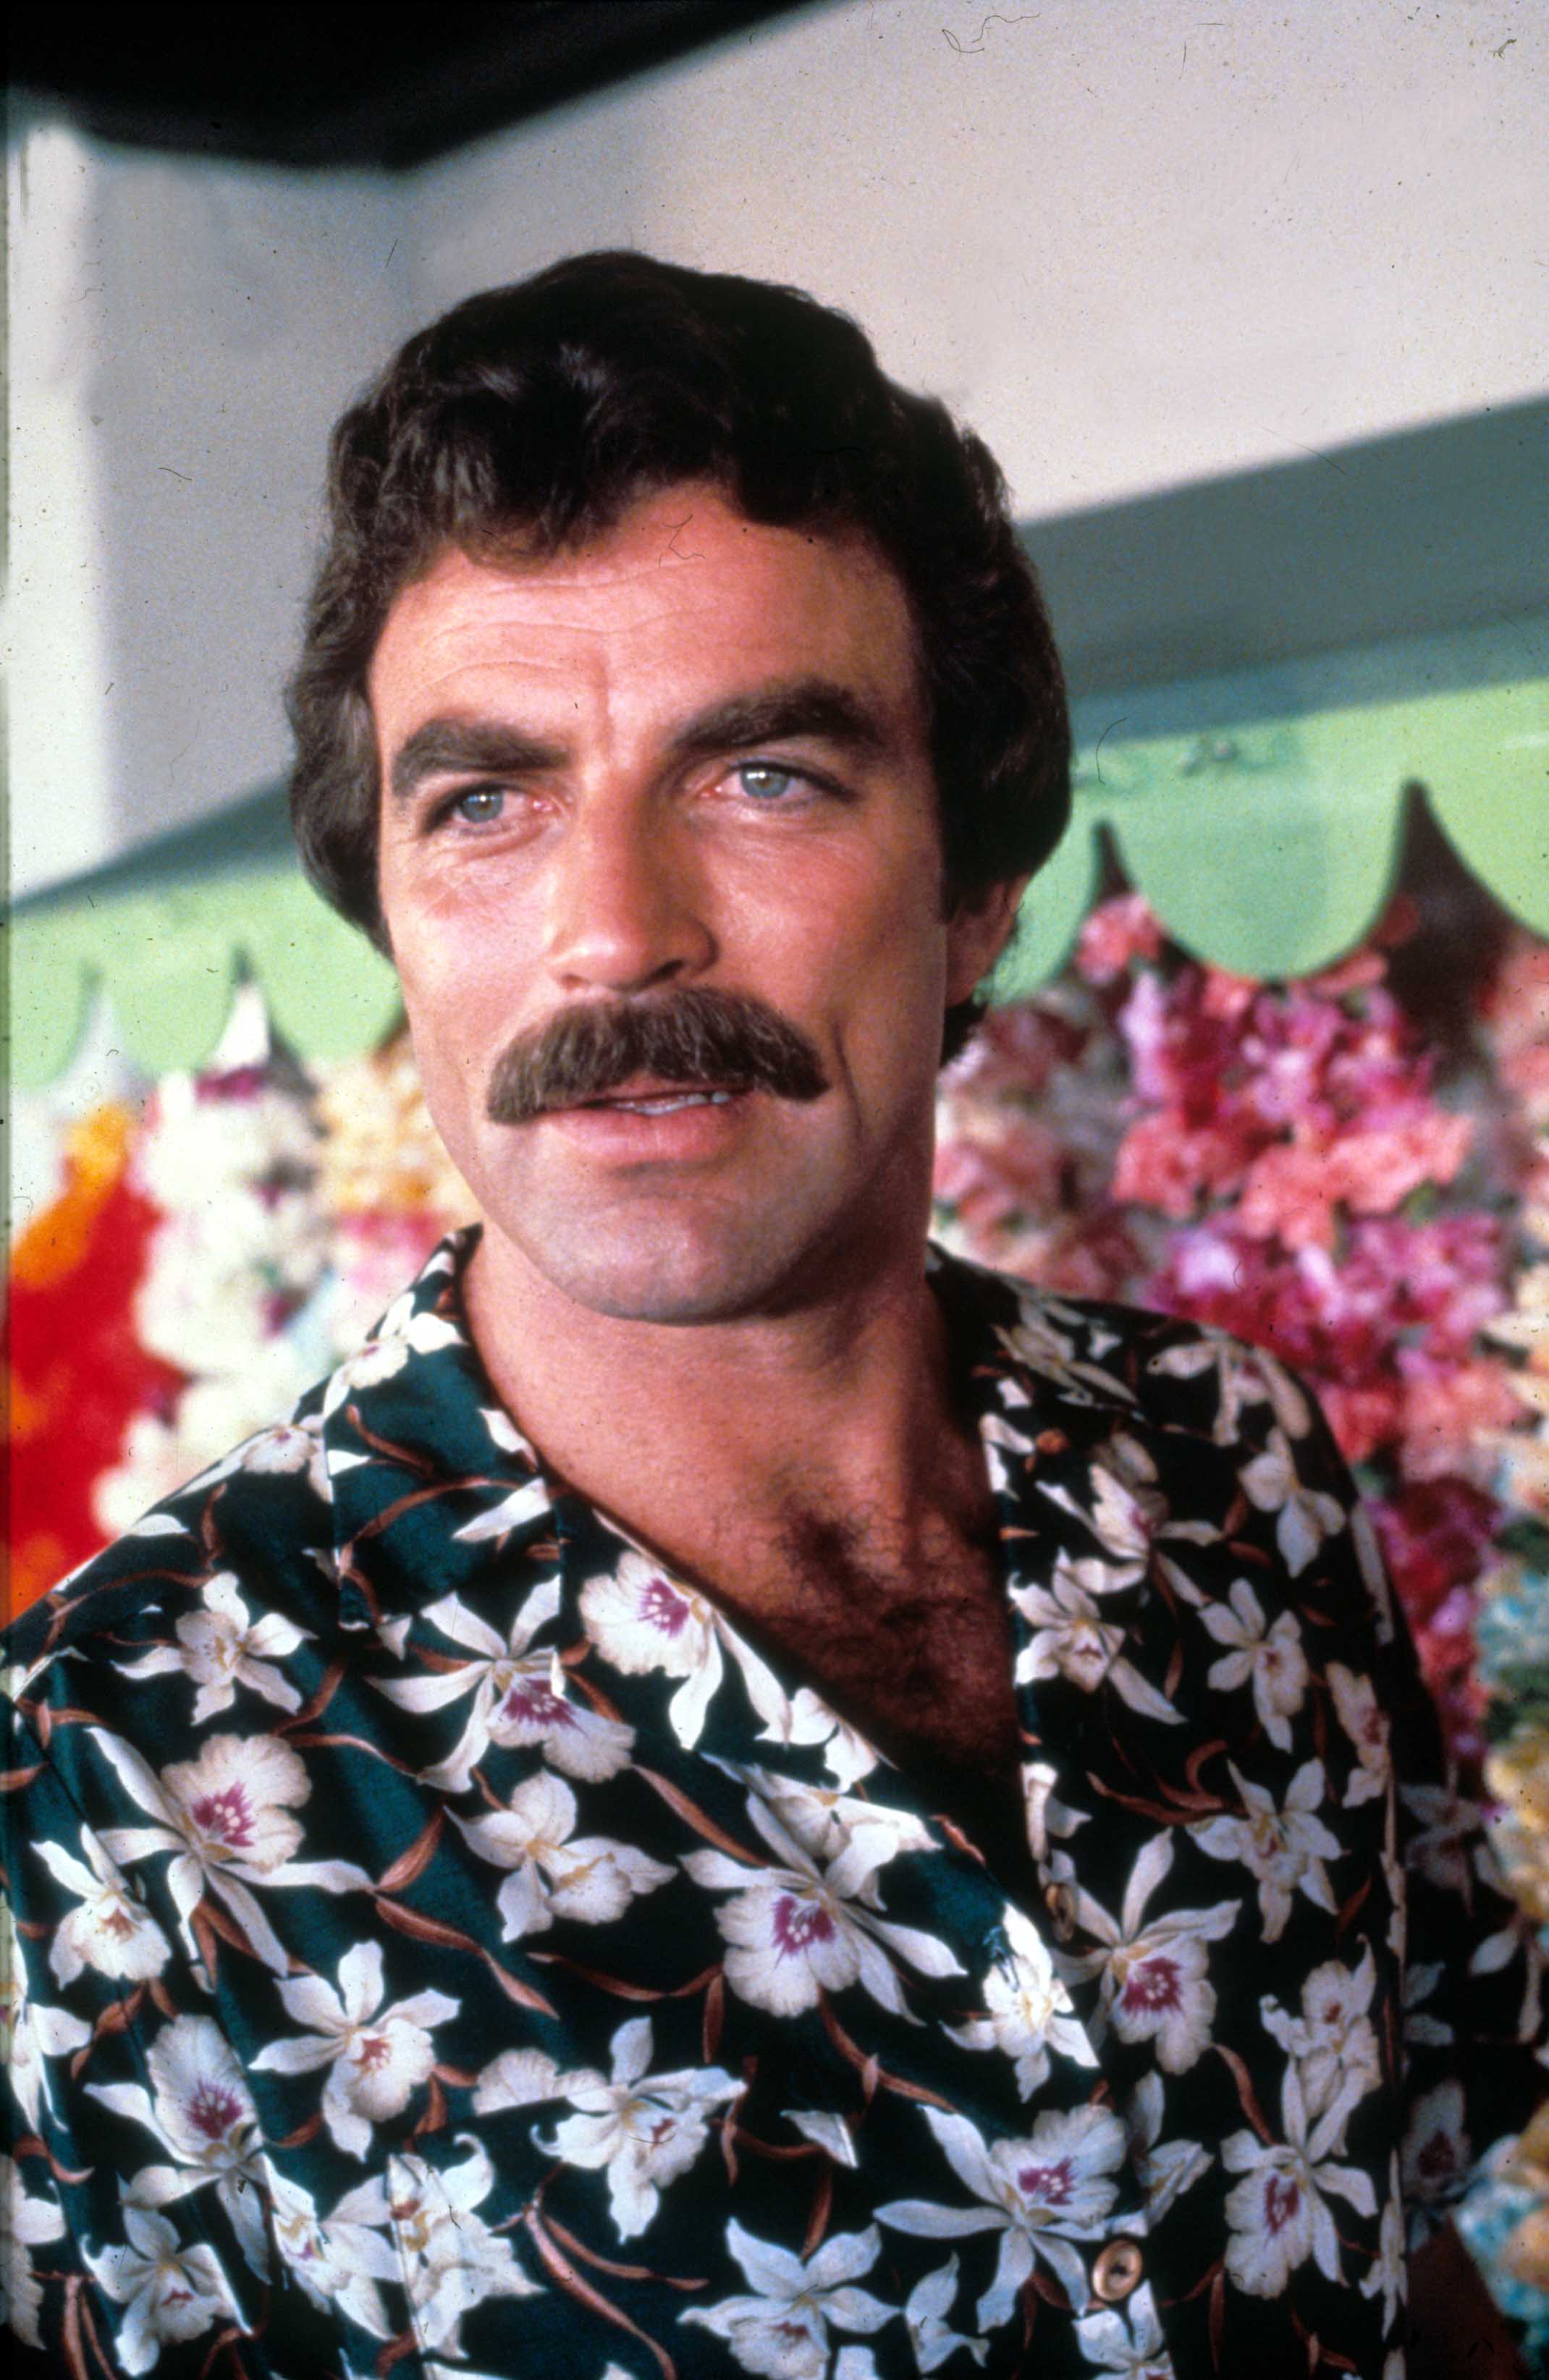 Tom Selleck Lives a 'Low-Key' Life Now, Is a 'Good Dad' to Kids